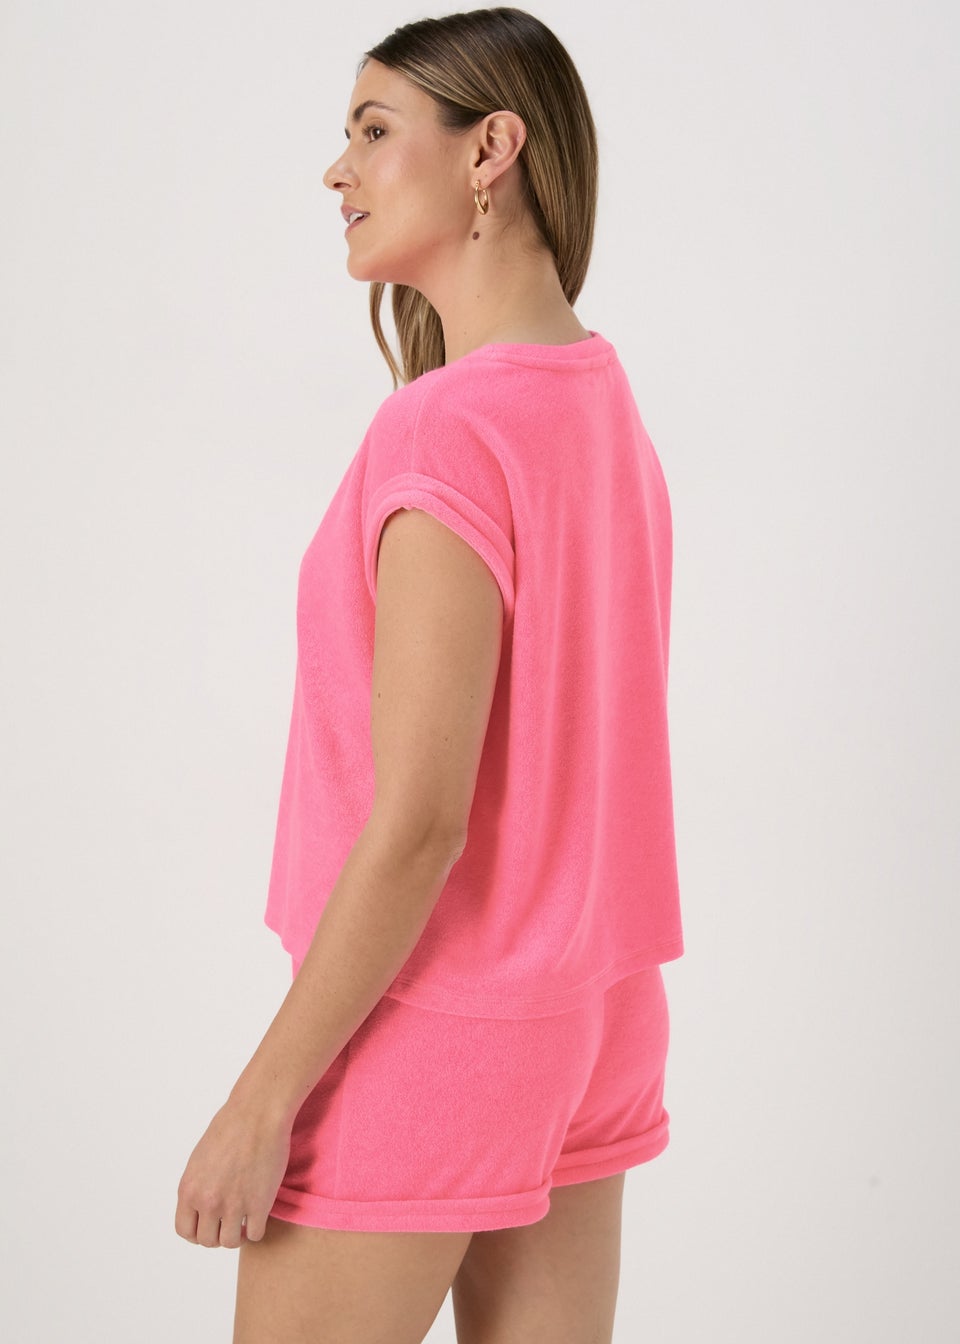 Towelling Top Pink